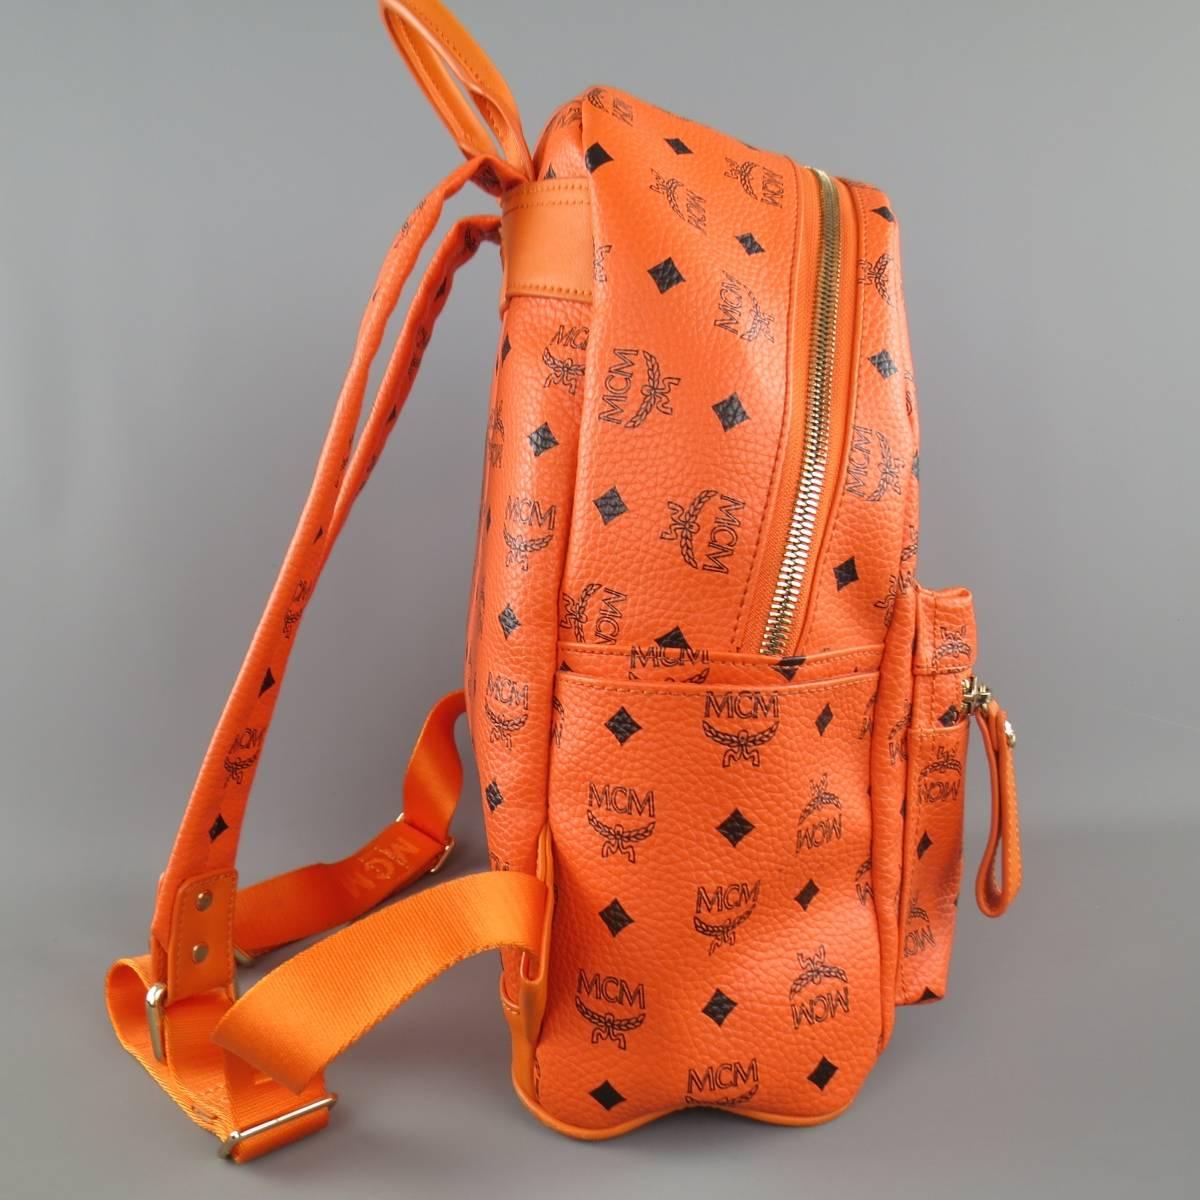 MCM backpack comes in orange coated canvas faux leather with all over black MCM logo print and features a frontal pocket, side pockets. gold tone engraved plaque, silver pyramid studs, and top zip closure. Wear throughout. As-Is.
 
Good Pre-Owned